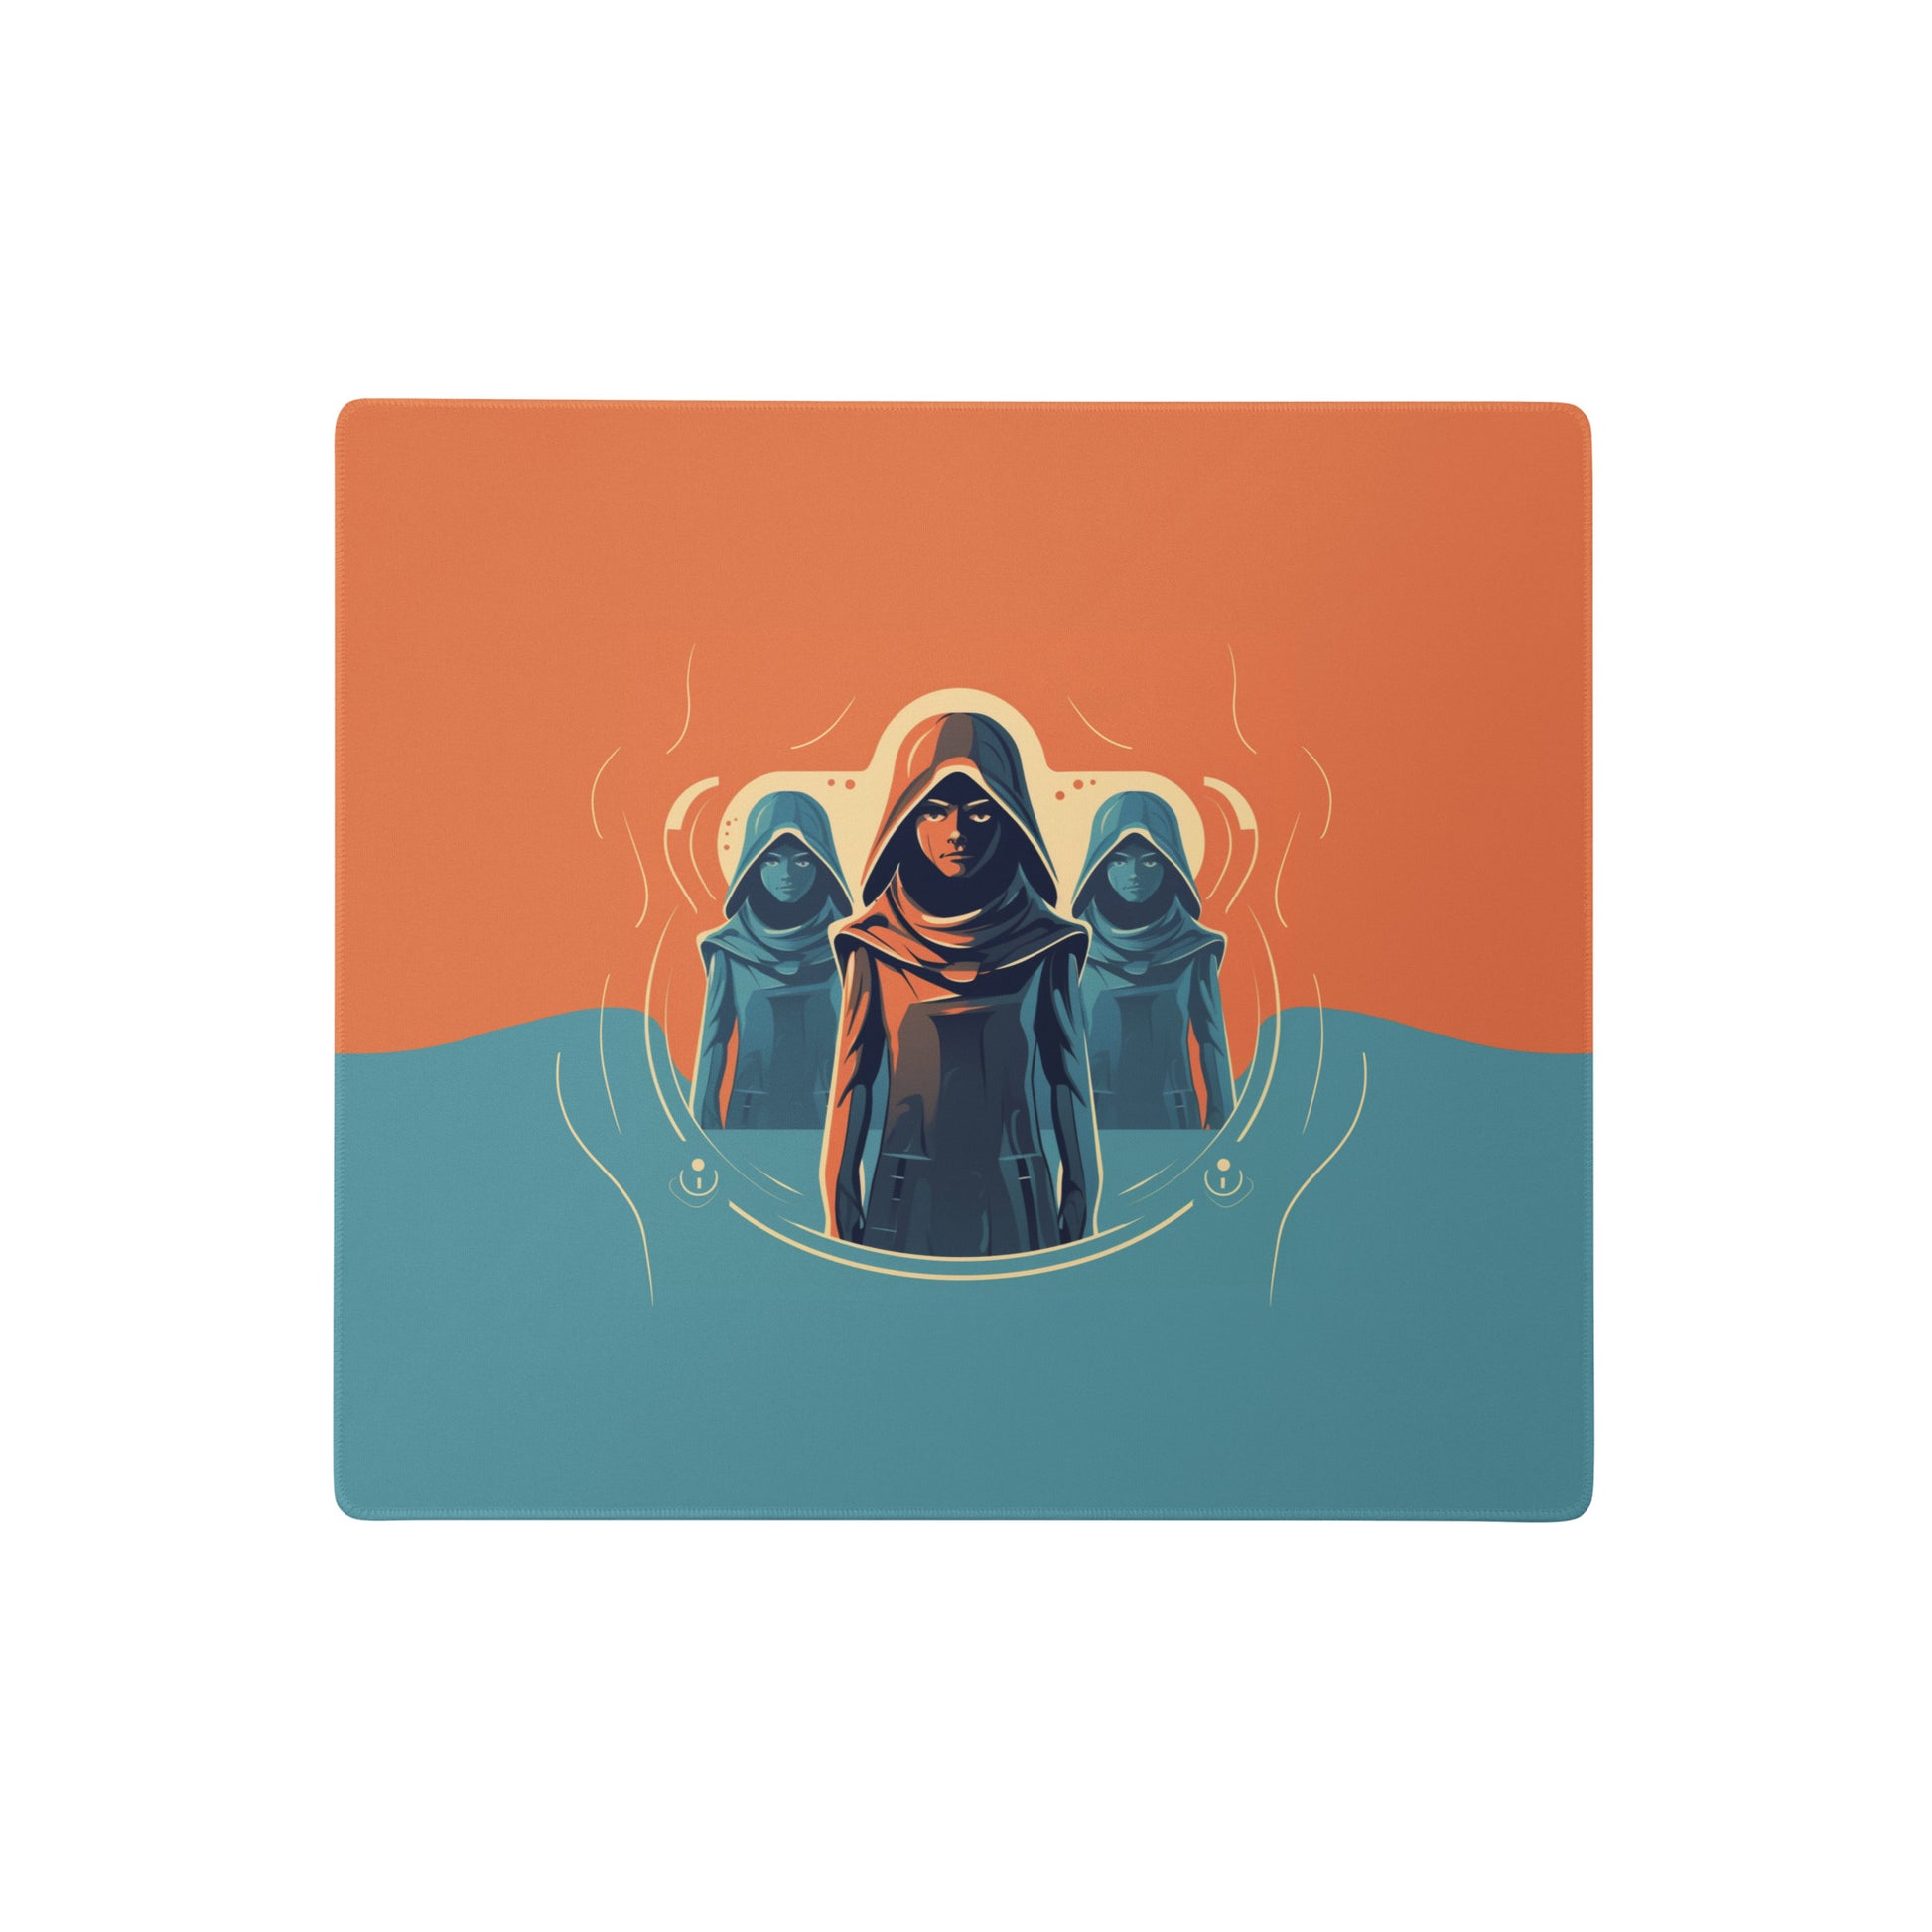 A 18" x 16" orange and blue desk pad with three robed figures.